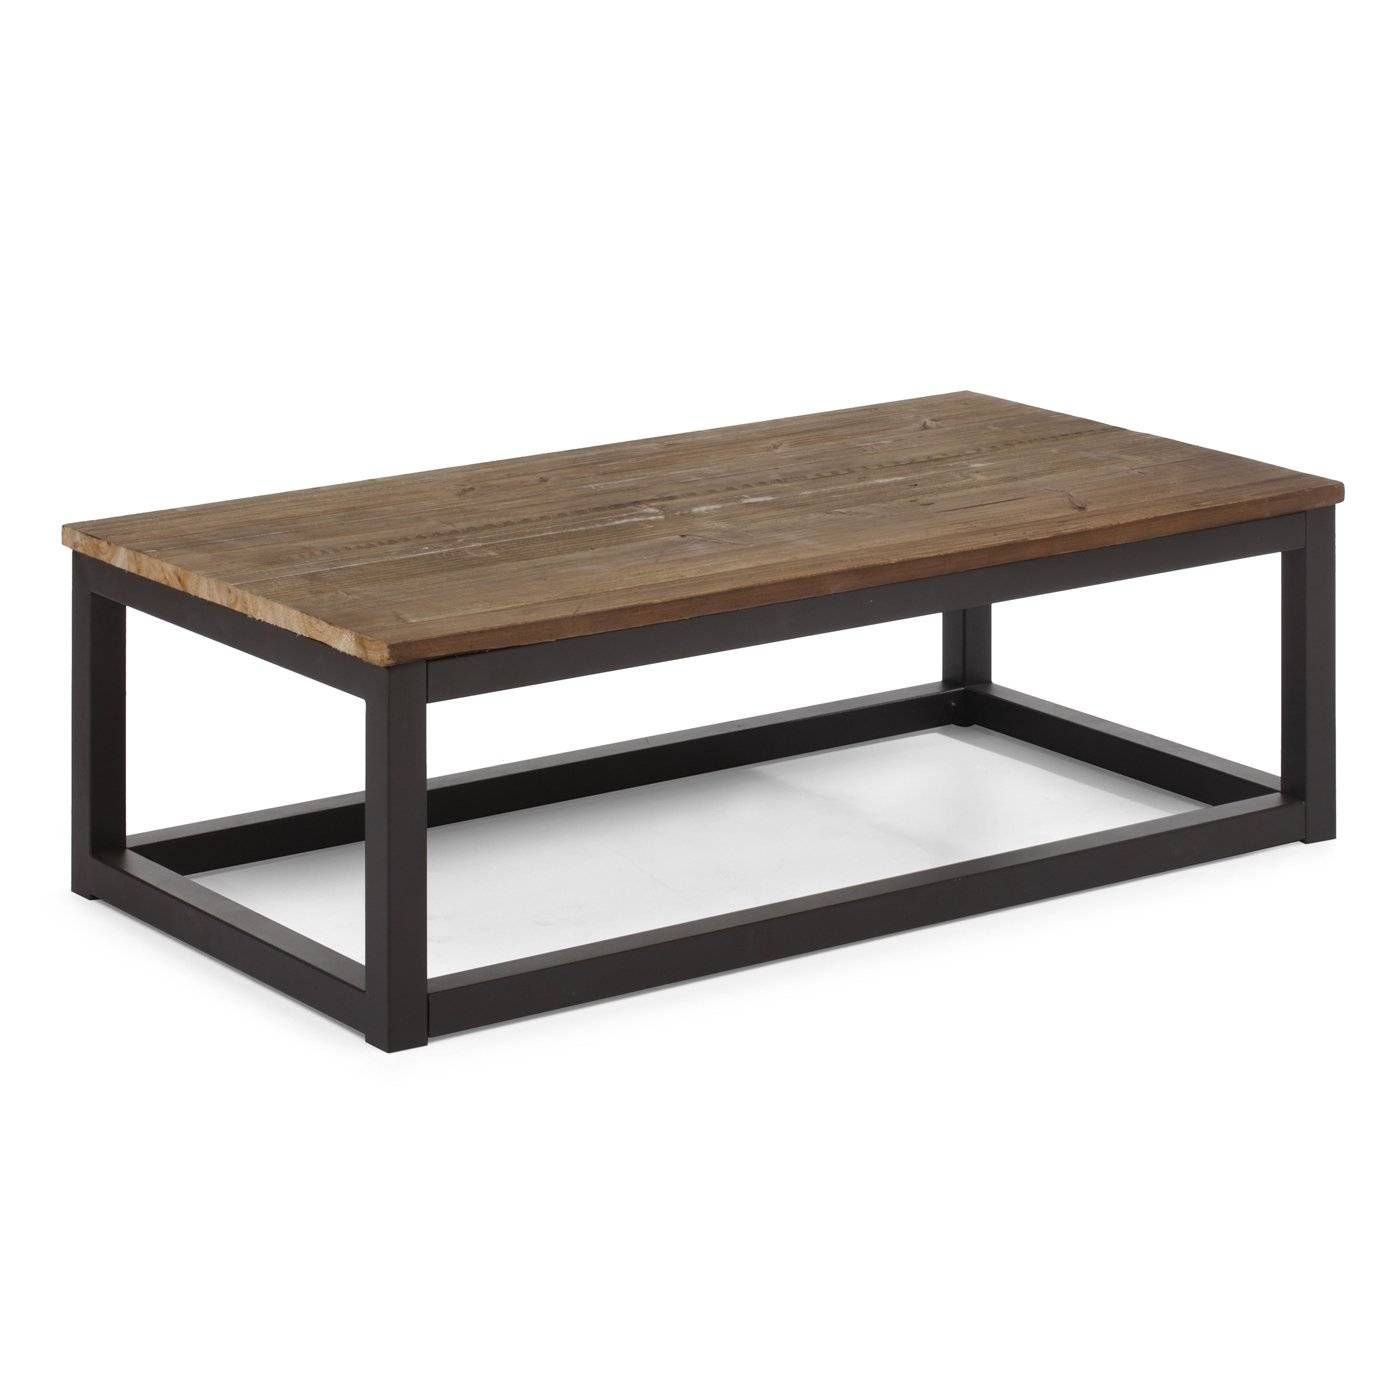 Zuo Modern 98123 Civic Center Long Coffee Table | Lowe's Canada With Long Coffee Tables (View 2 of 15)